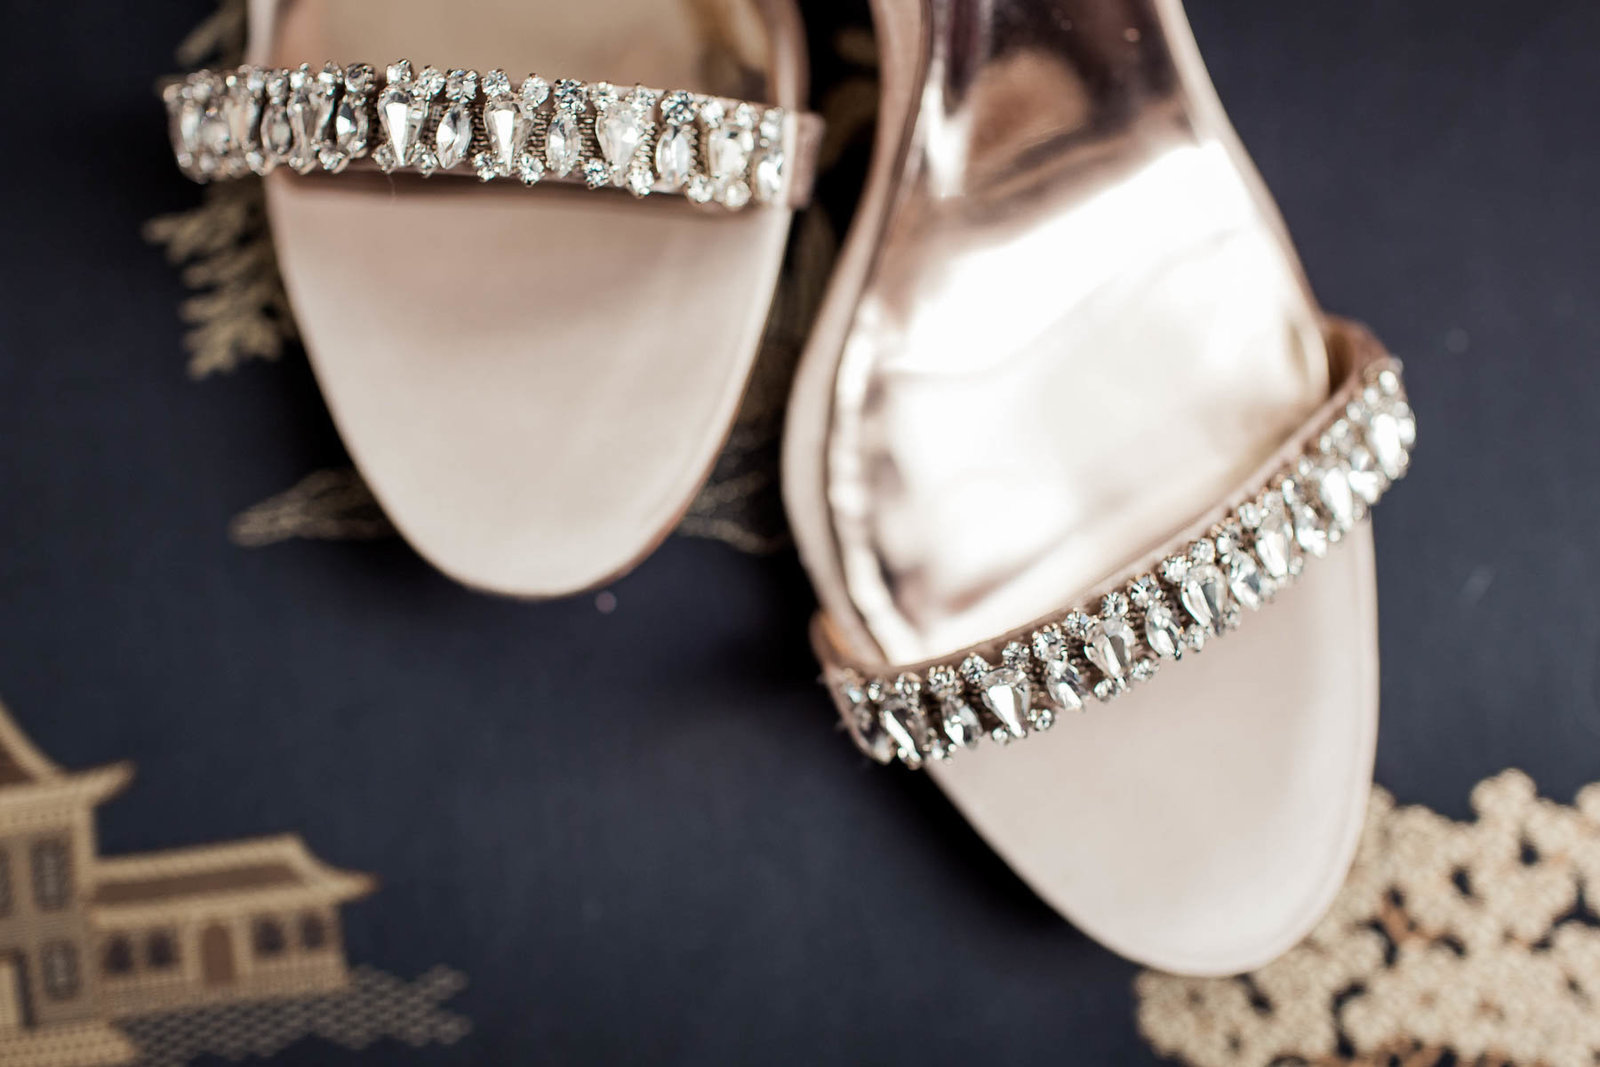 Bride's shoes sit on vintage chair, Downtown Private Estate, Charleston, South Carolina. Kate Timbers Photography.